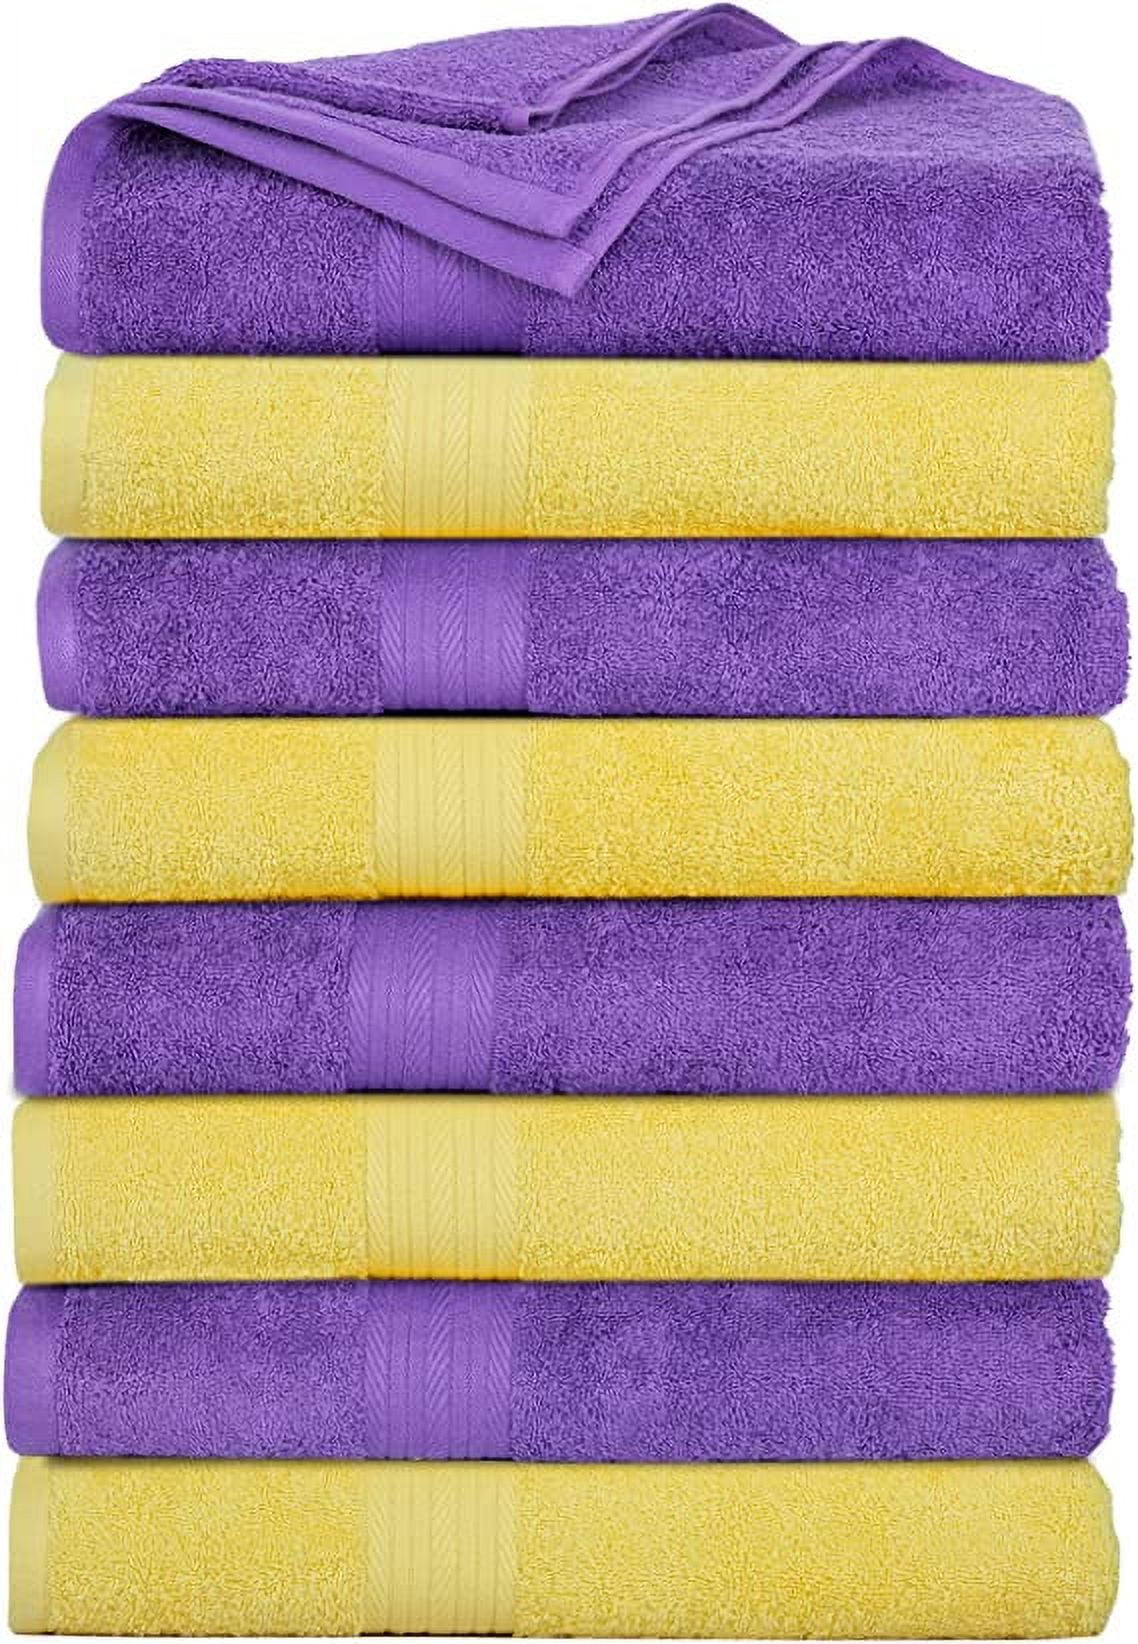 Groko Textiles Small and Lightweight Cotton Towels Assorted Pastel Mix 24 x  40 inches Towels (6)